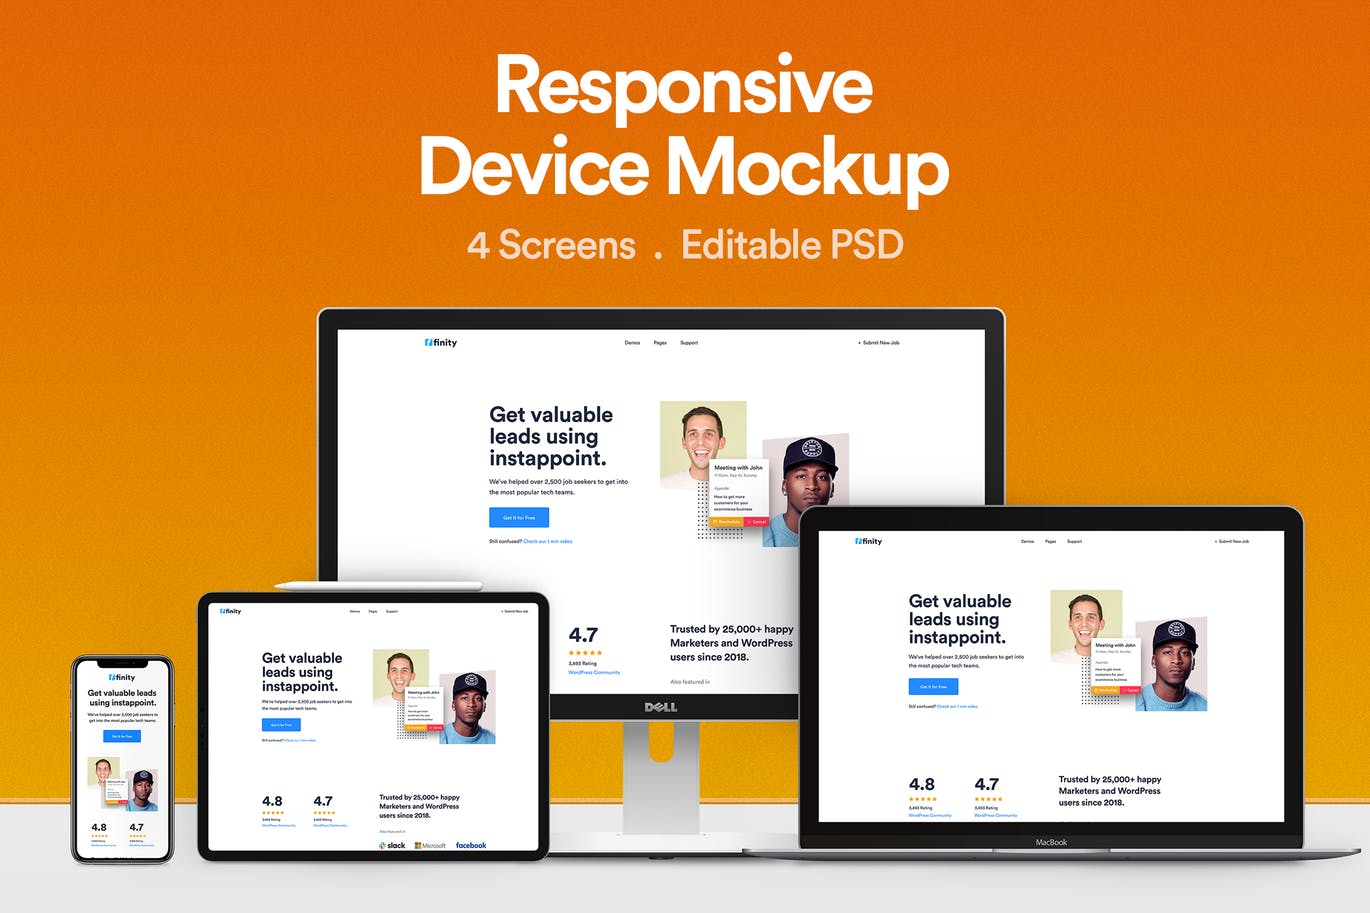 A responsive devices mockup template